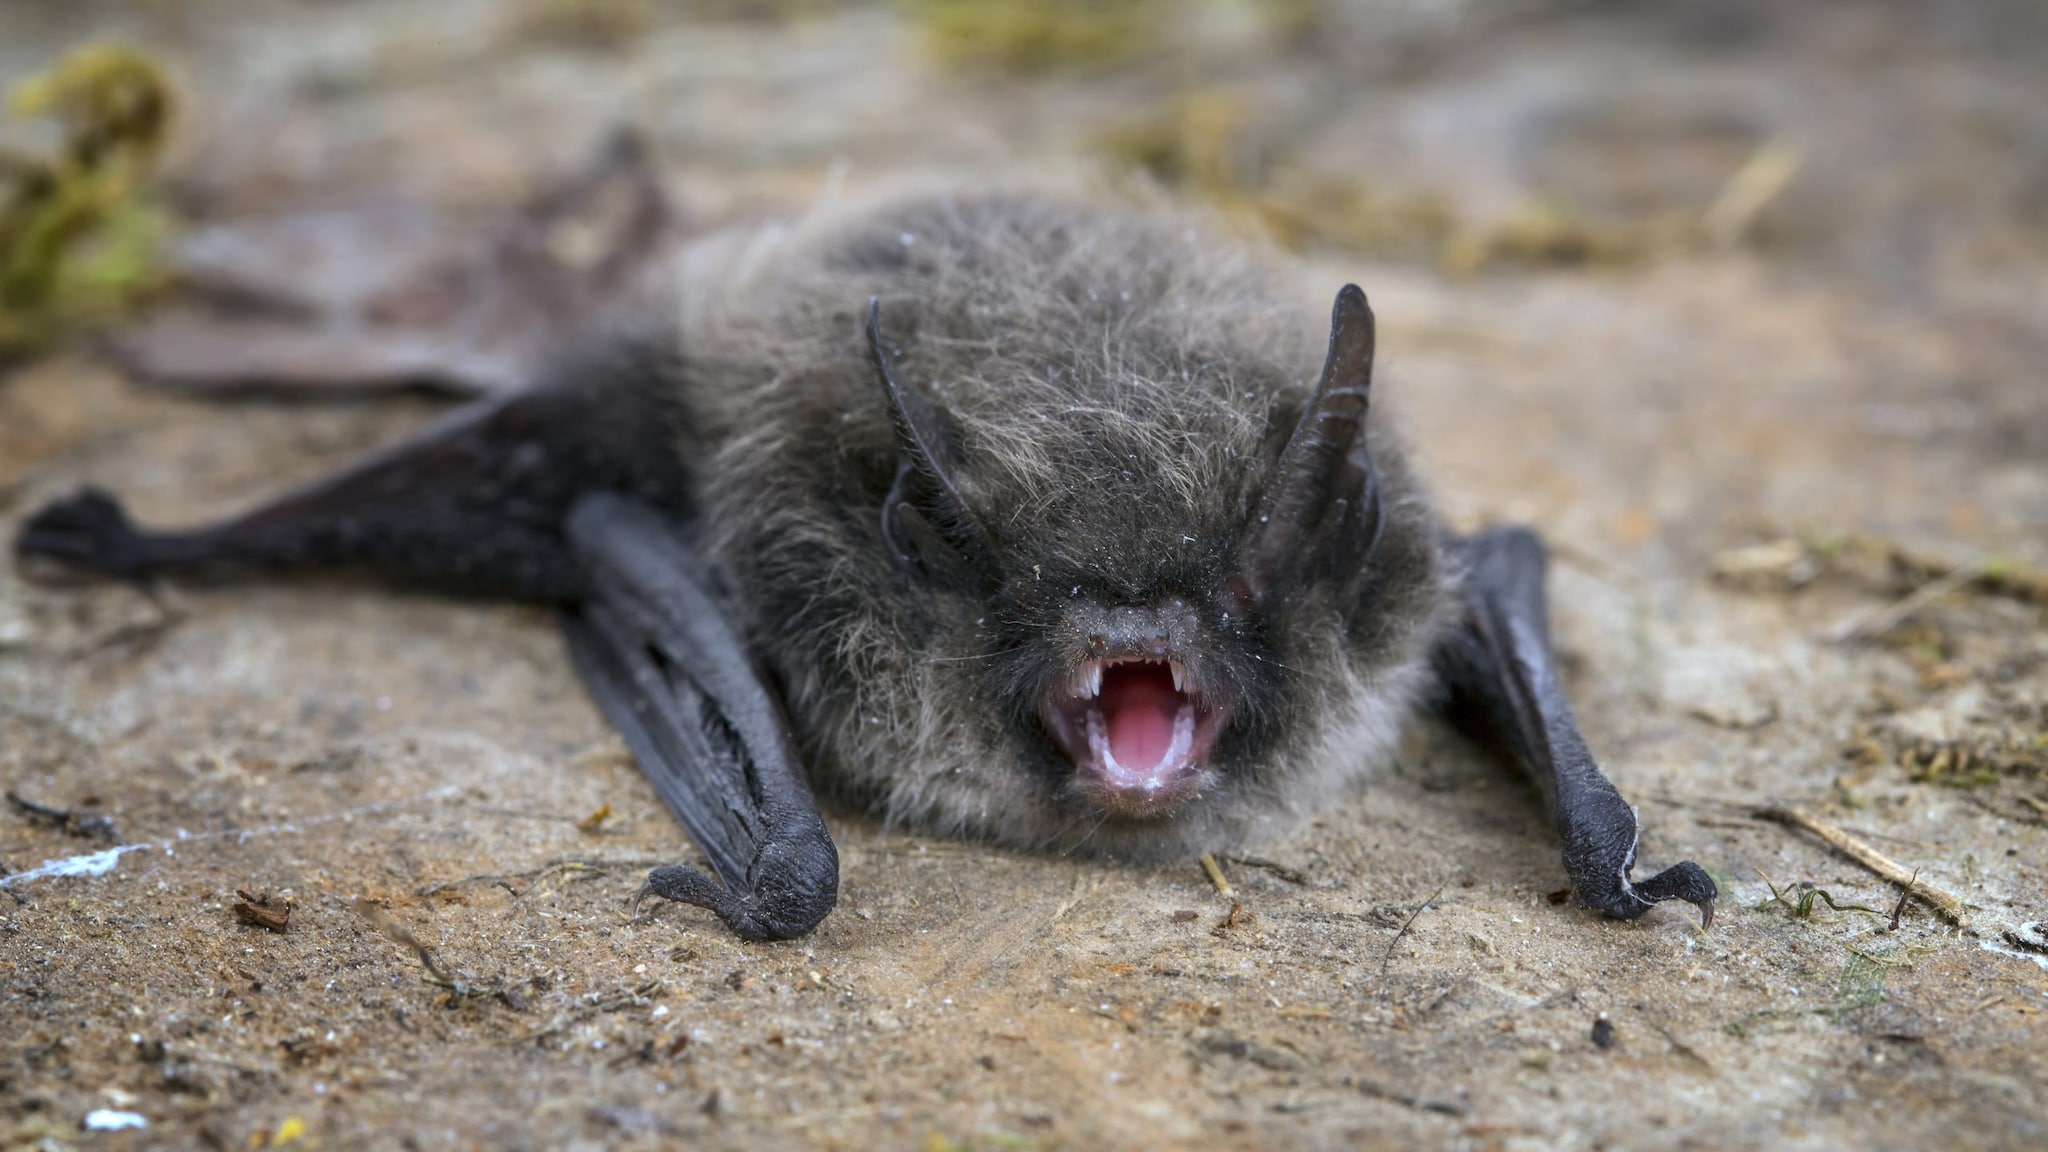 Small bat on the ground with mouth open